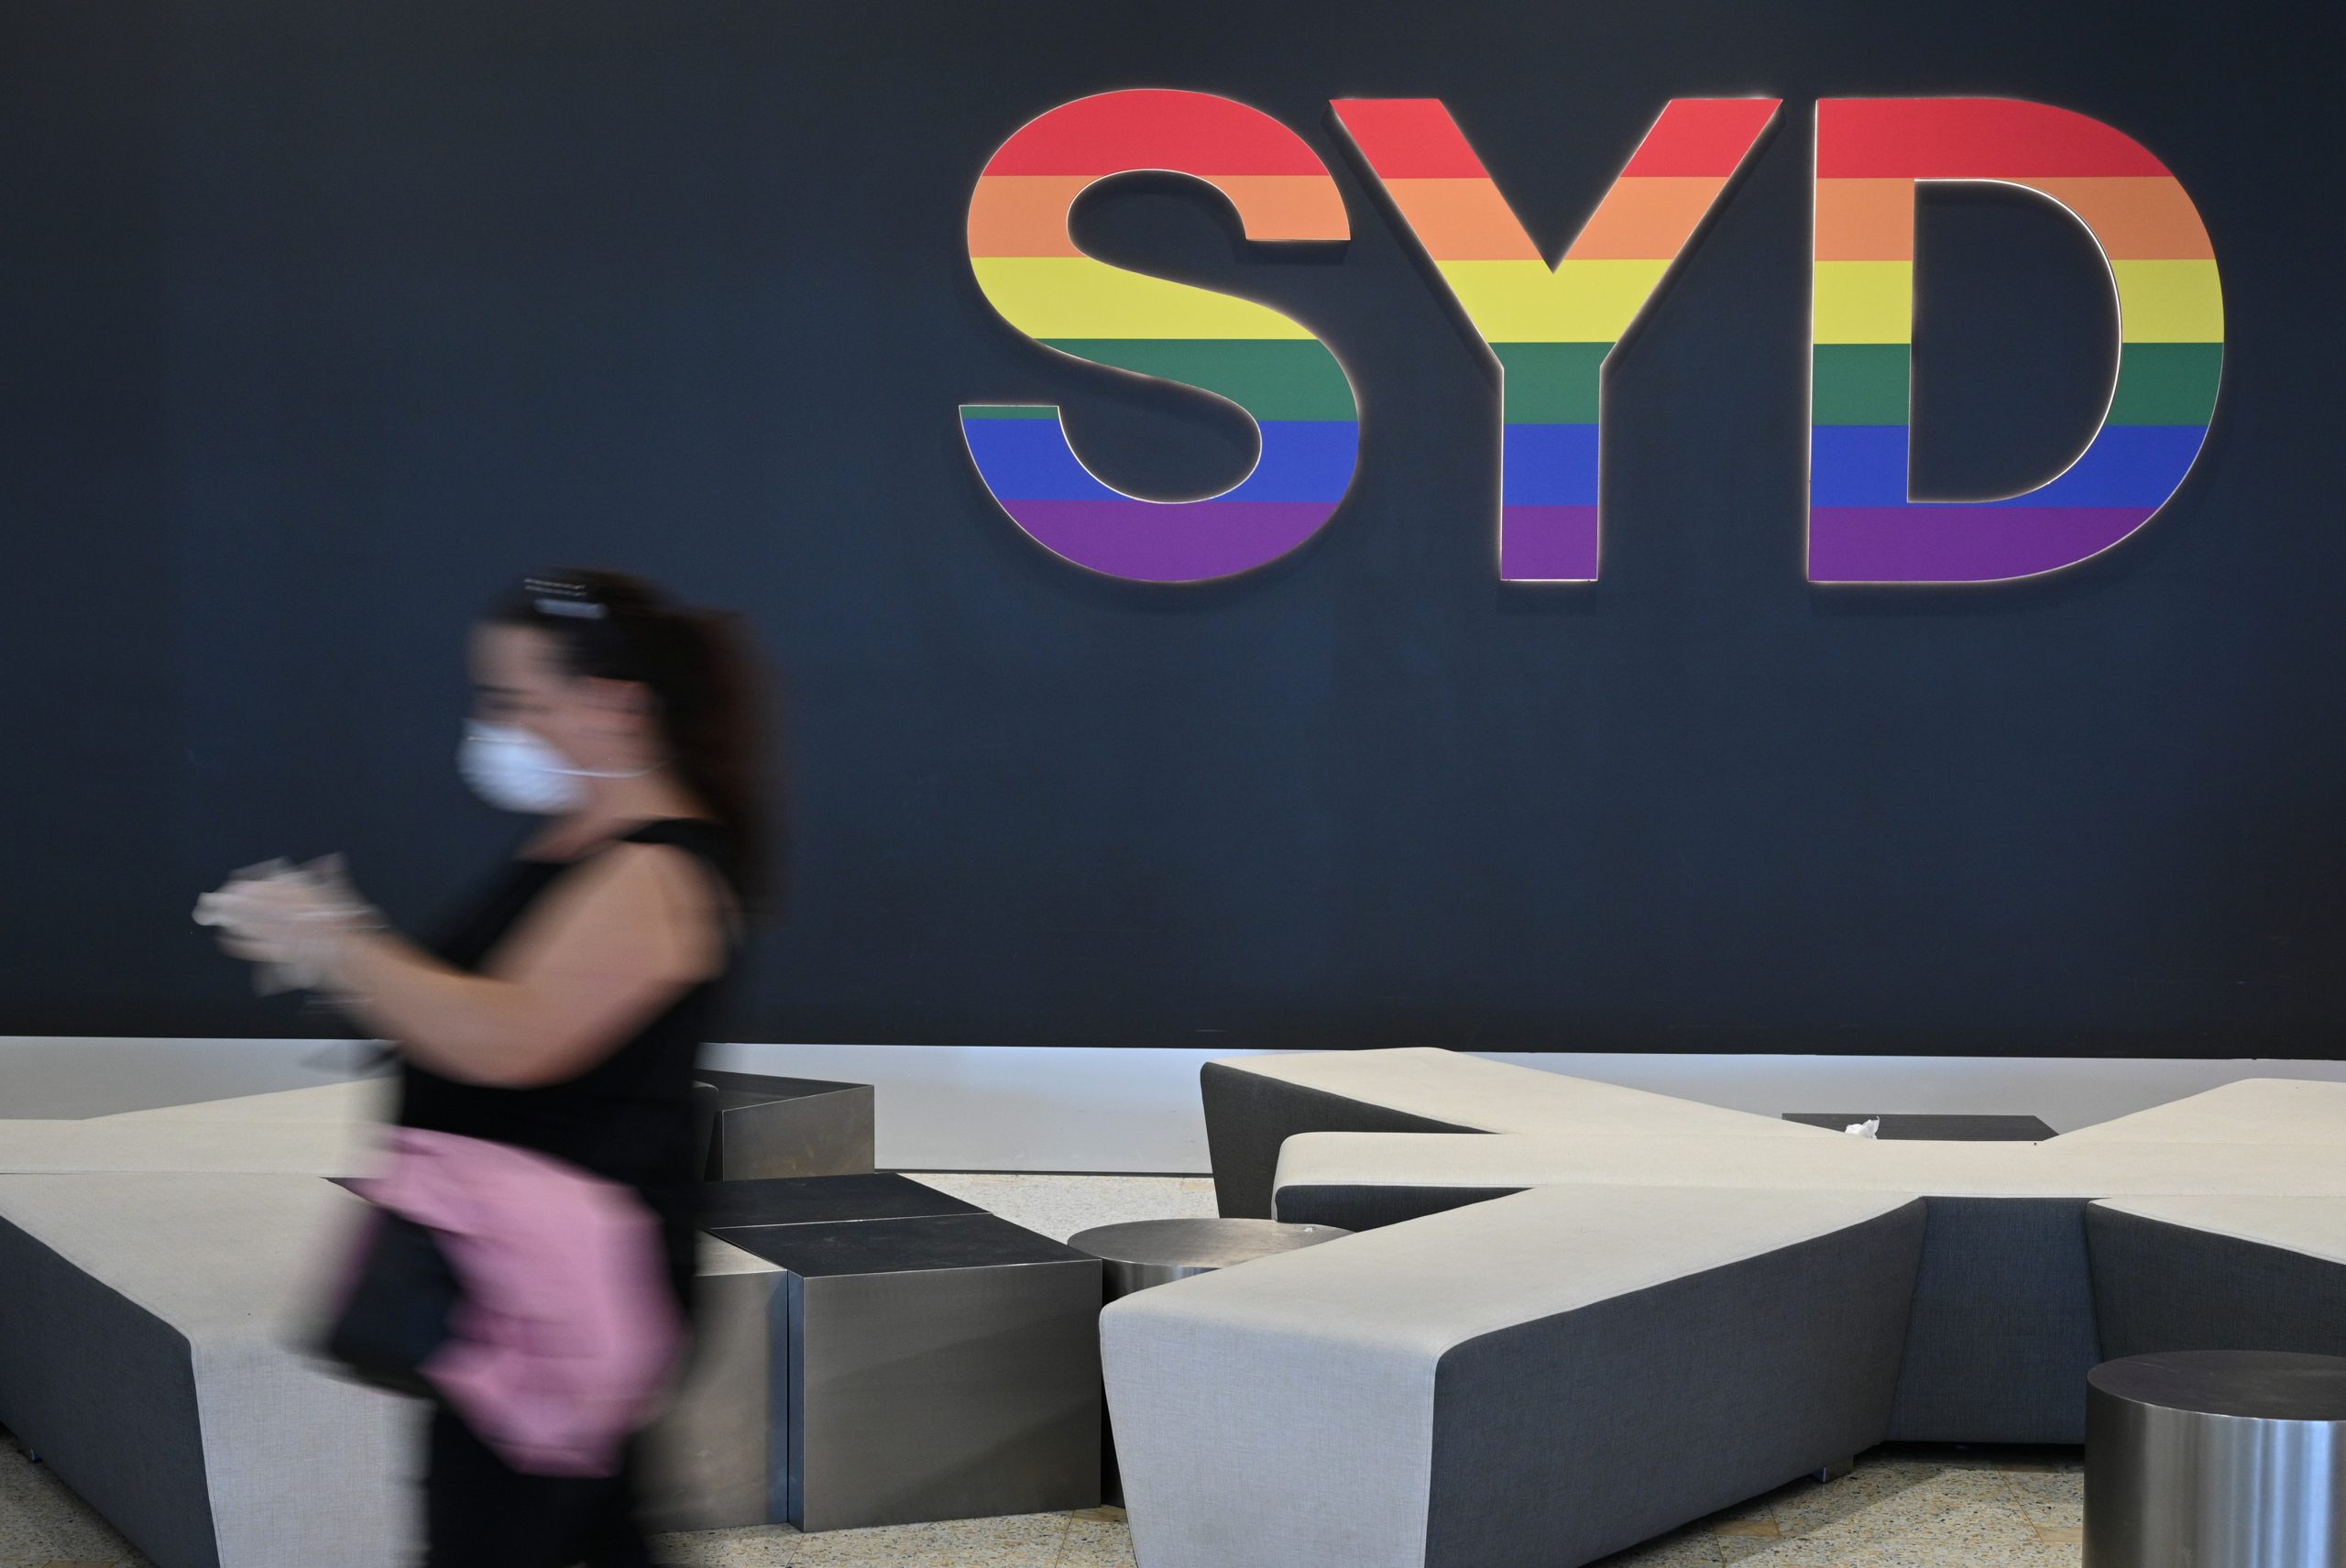  Sydney Airport rejects improved $16.8 bln buyout bid, open to higher offer